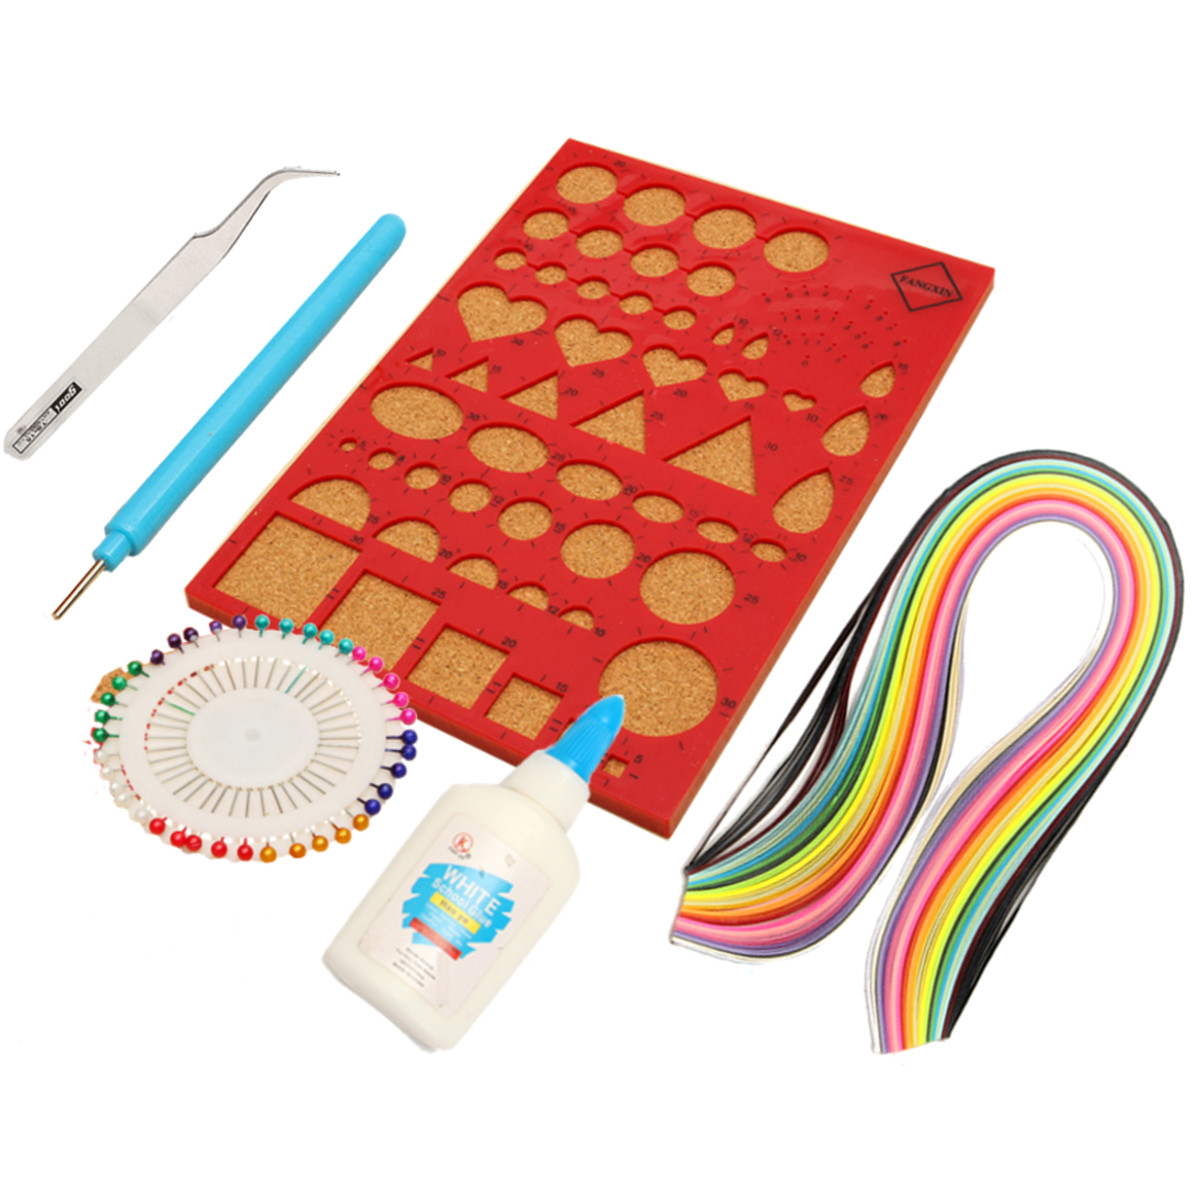 1-Set-Creations-Paper-Quilling-Kit-Slotted-Tools-Pins-Tweezer-Board-DIY-Craft-1065951